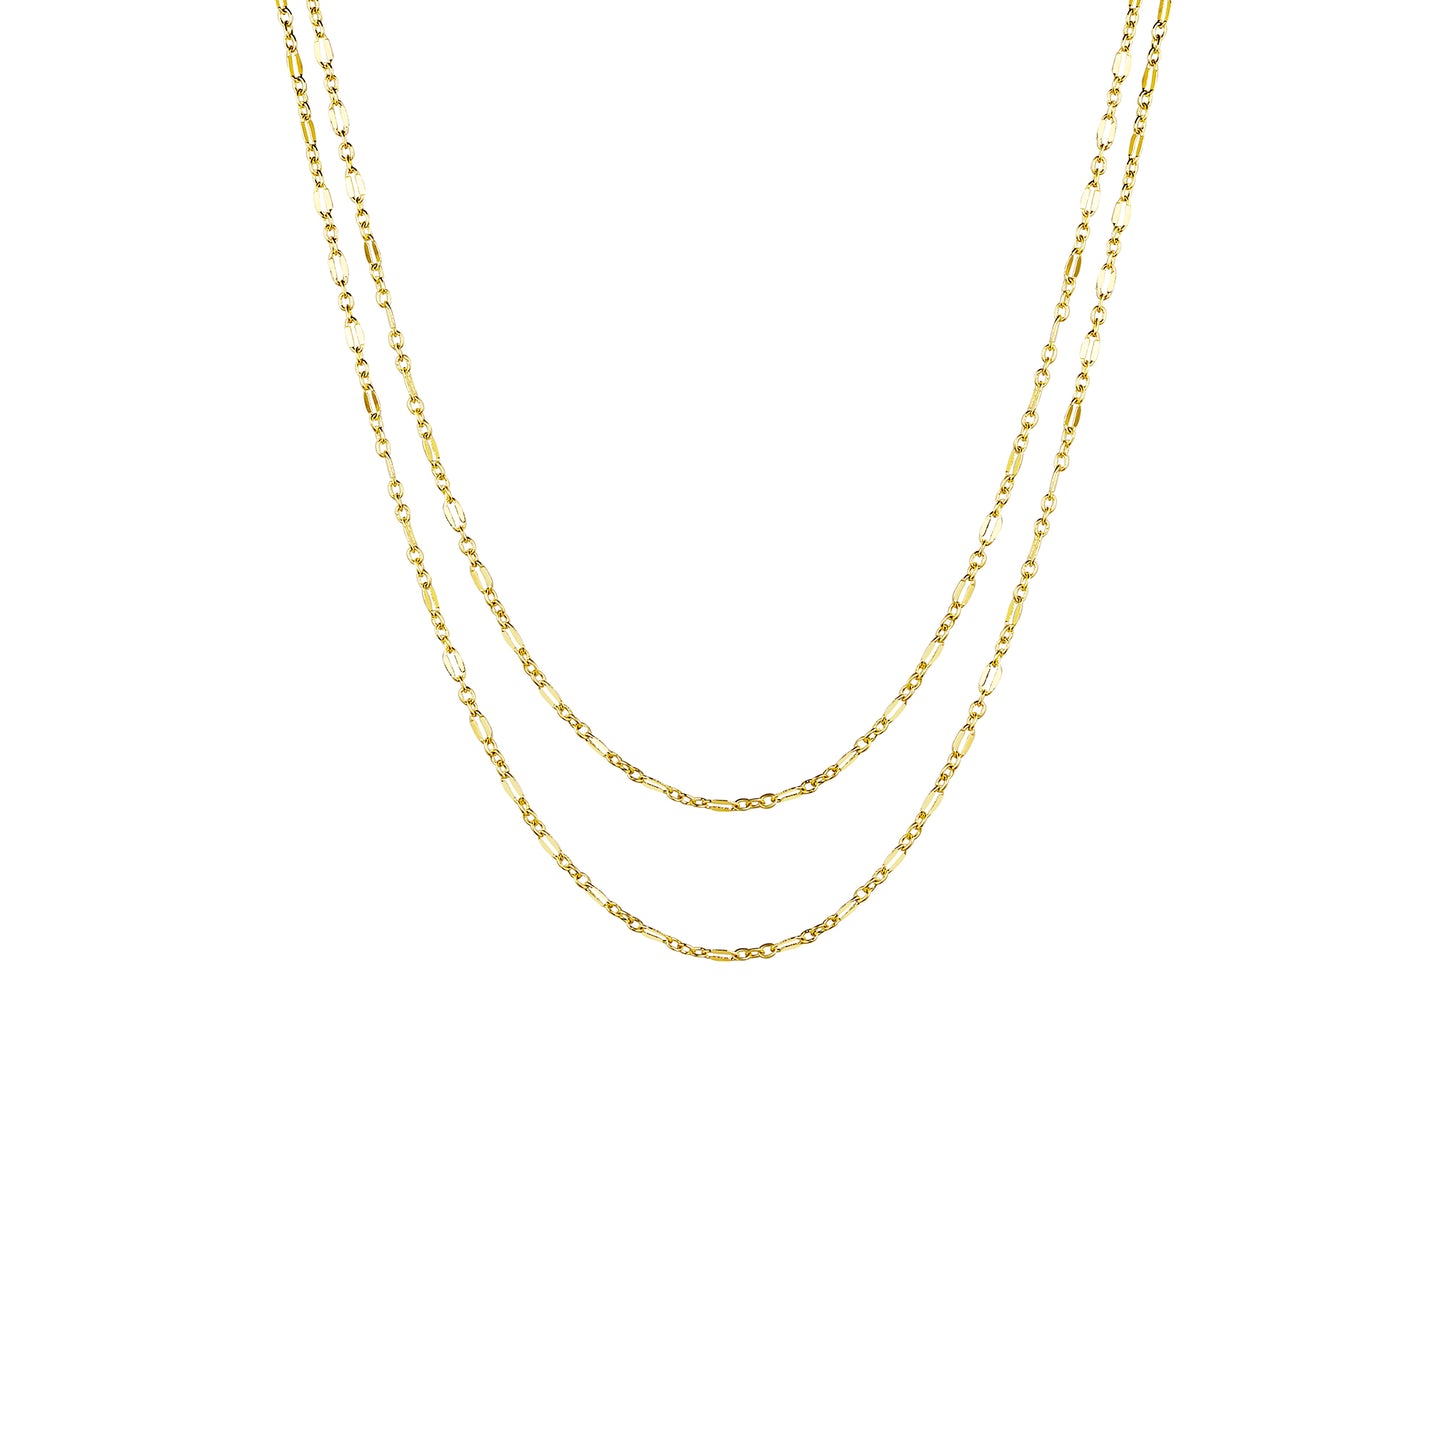 TASISO 14K Gold Plated Layered Lip Chain Choker Necklace